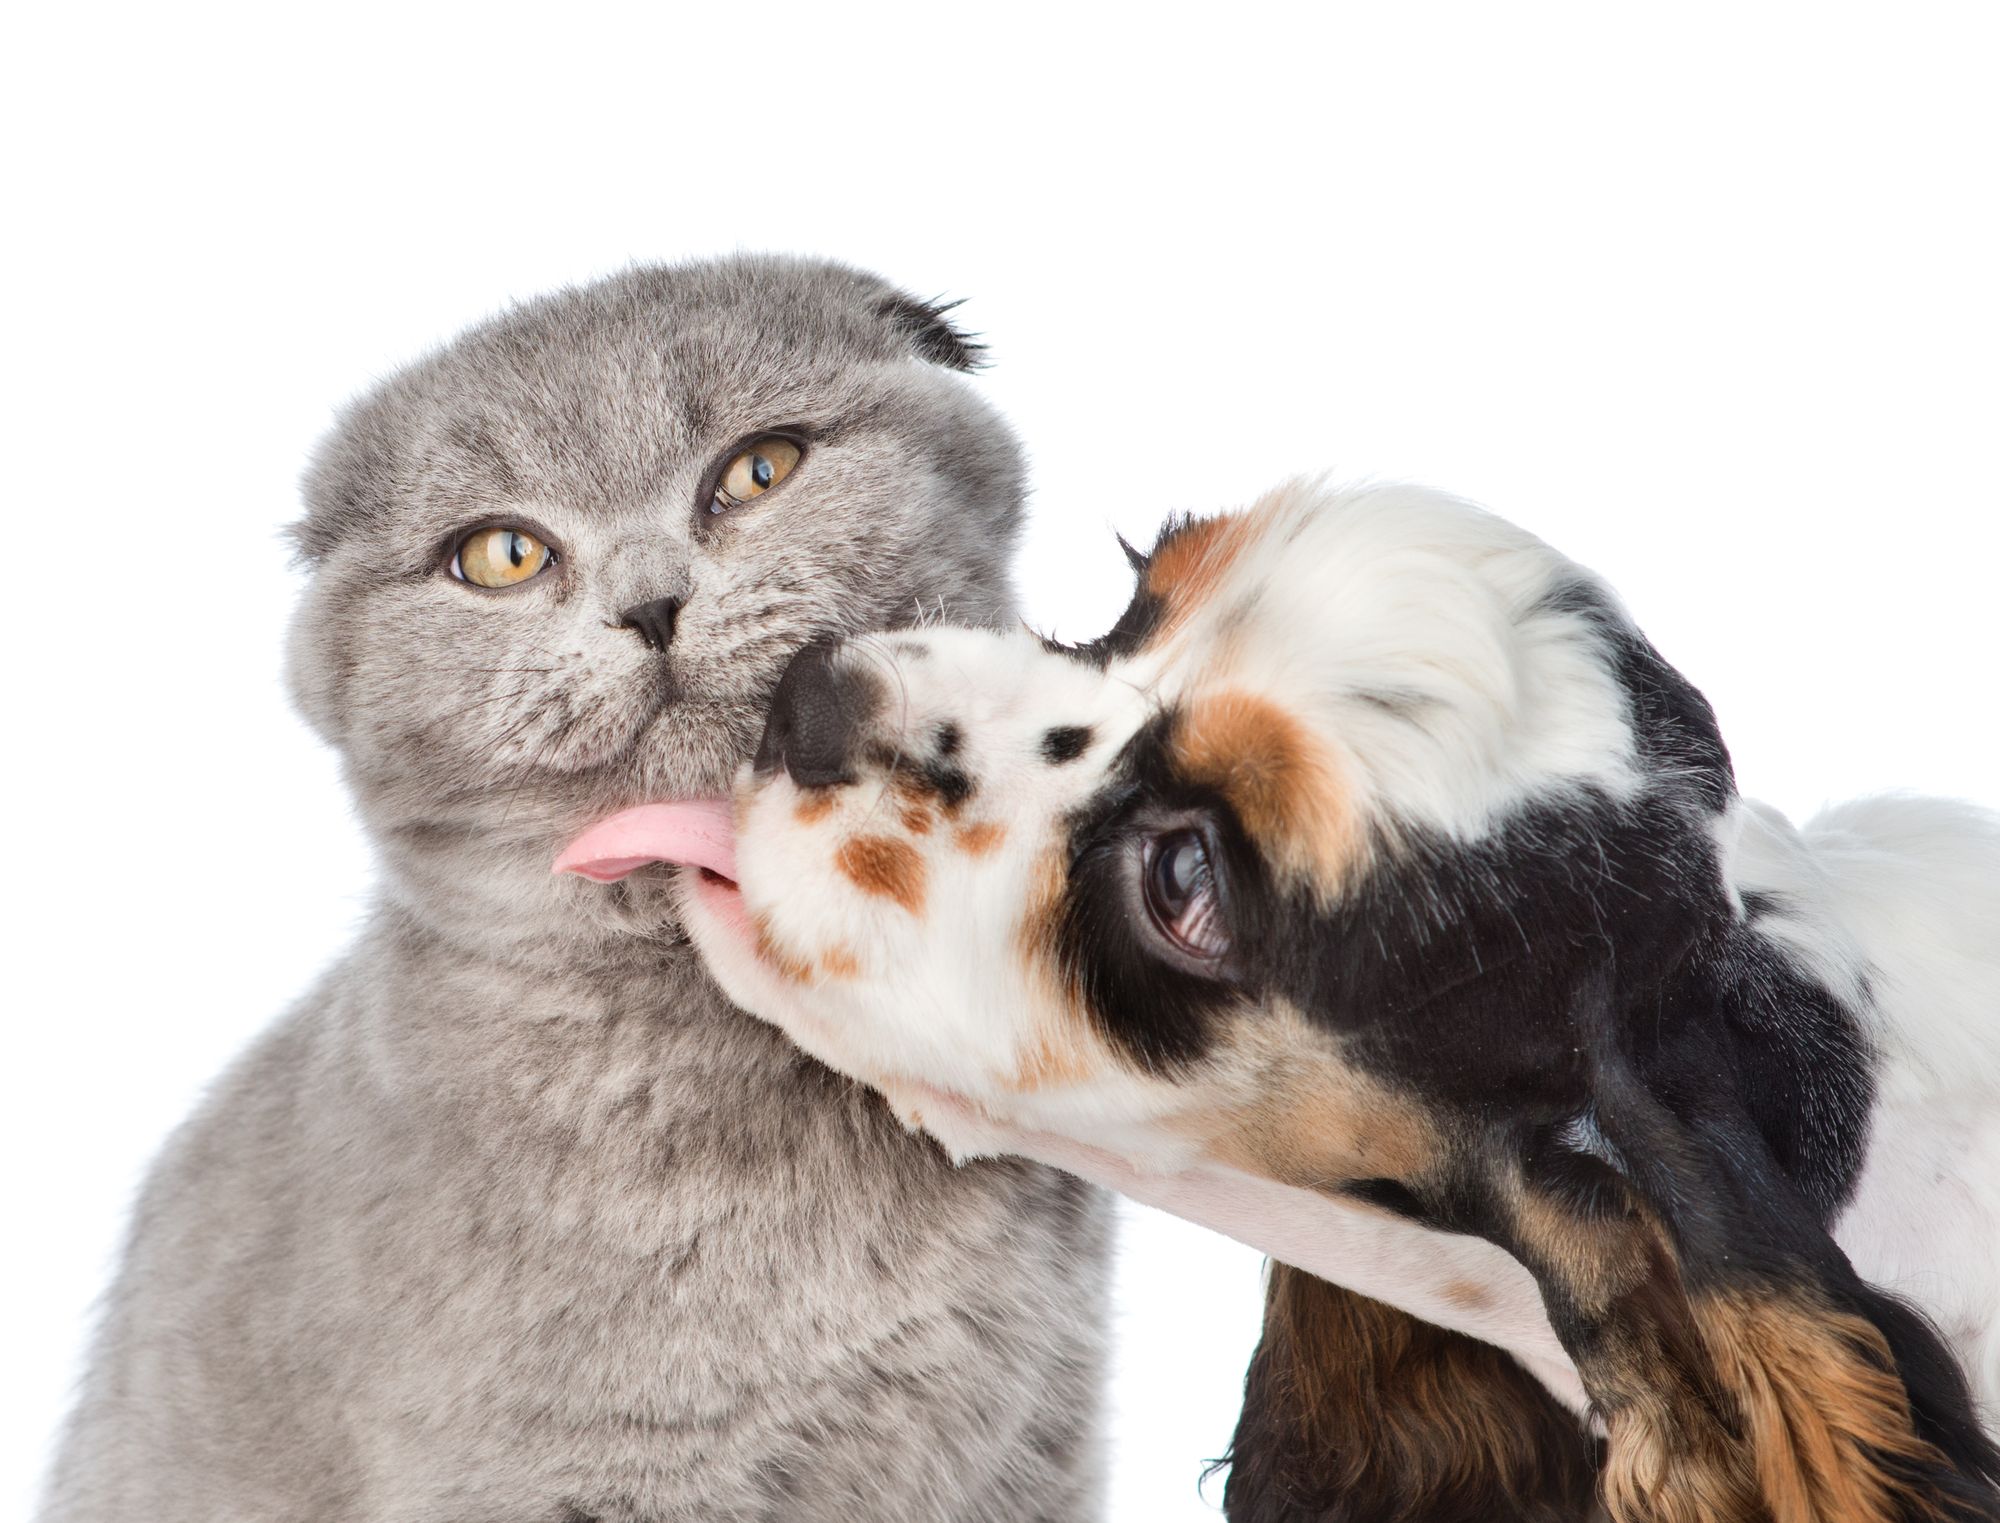 Puppy licking a cat